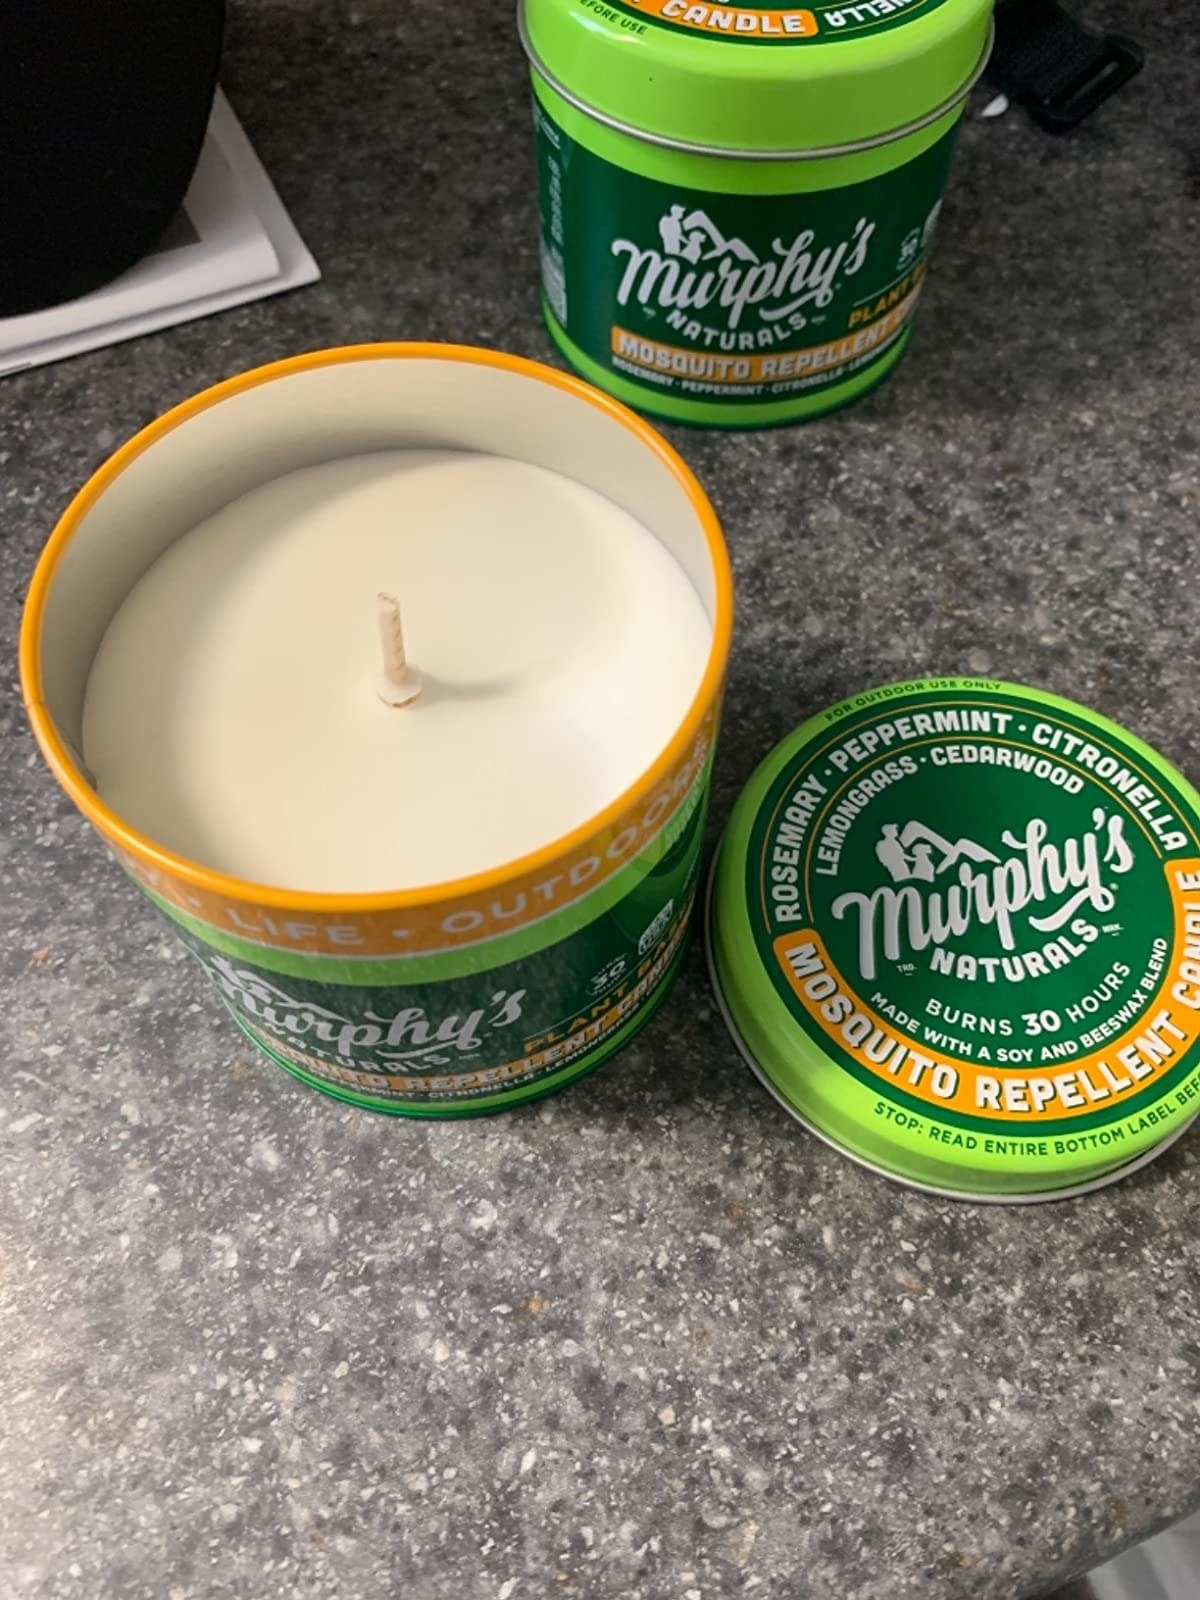 Reviewer photo of the candle